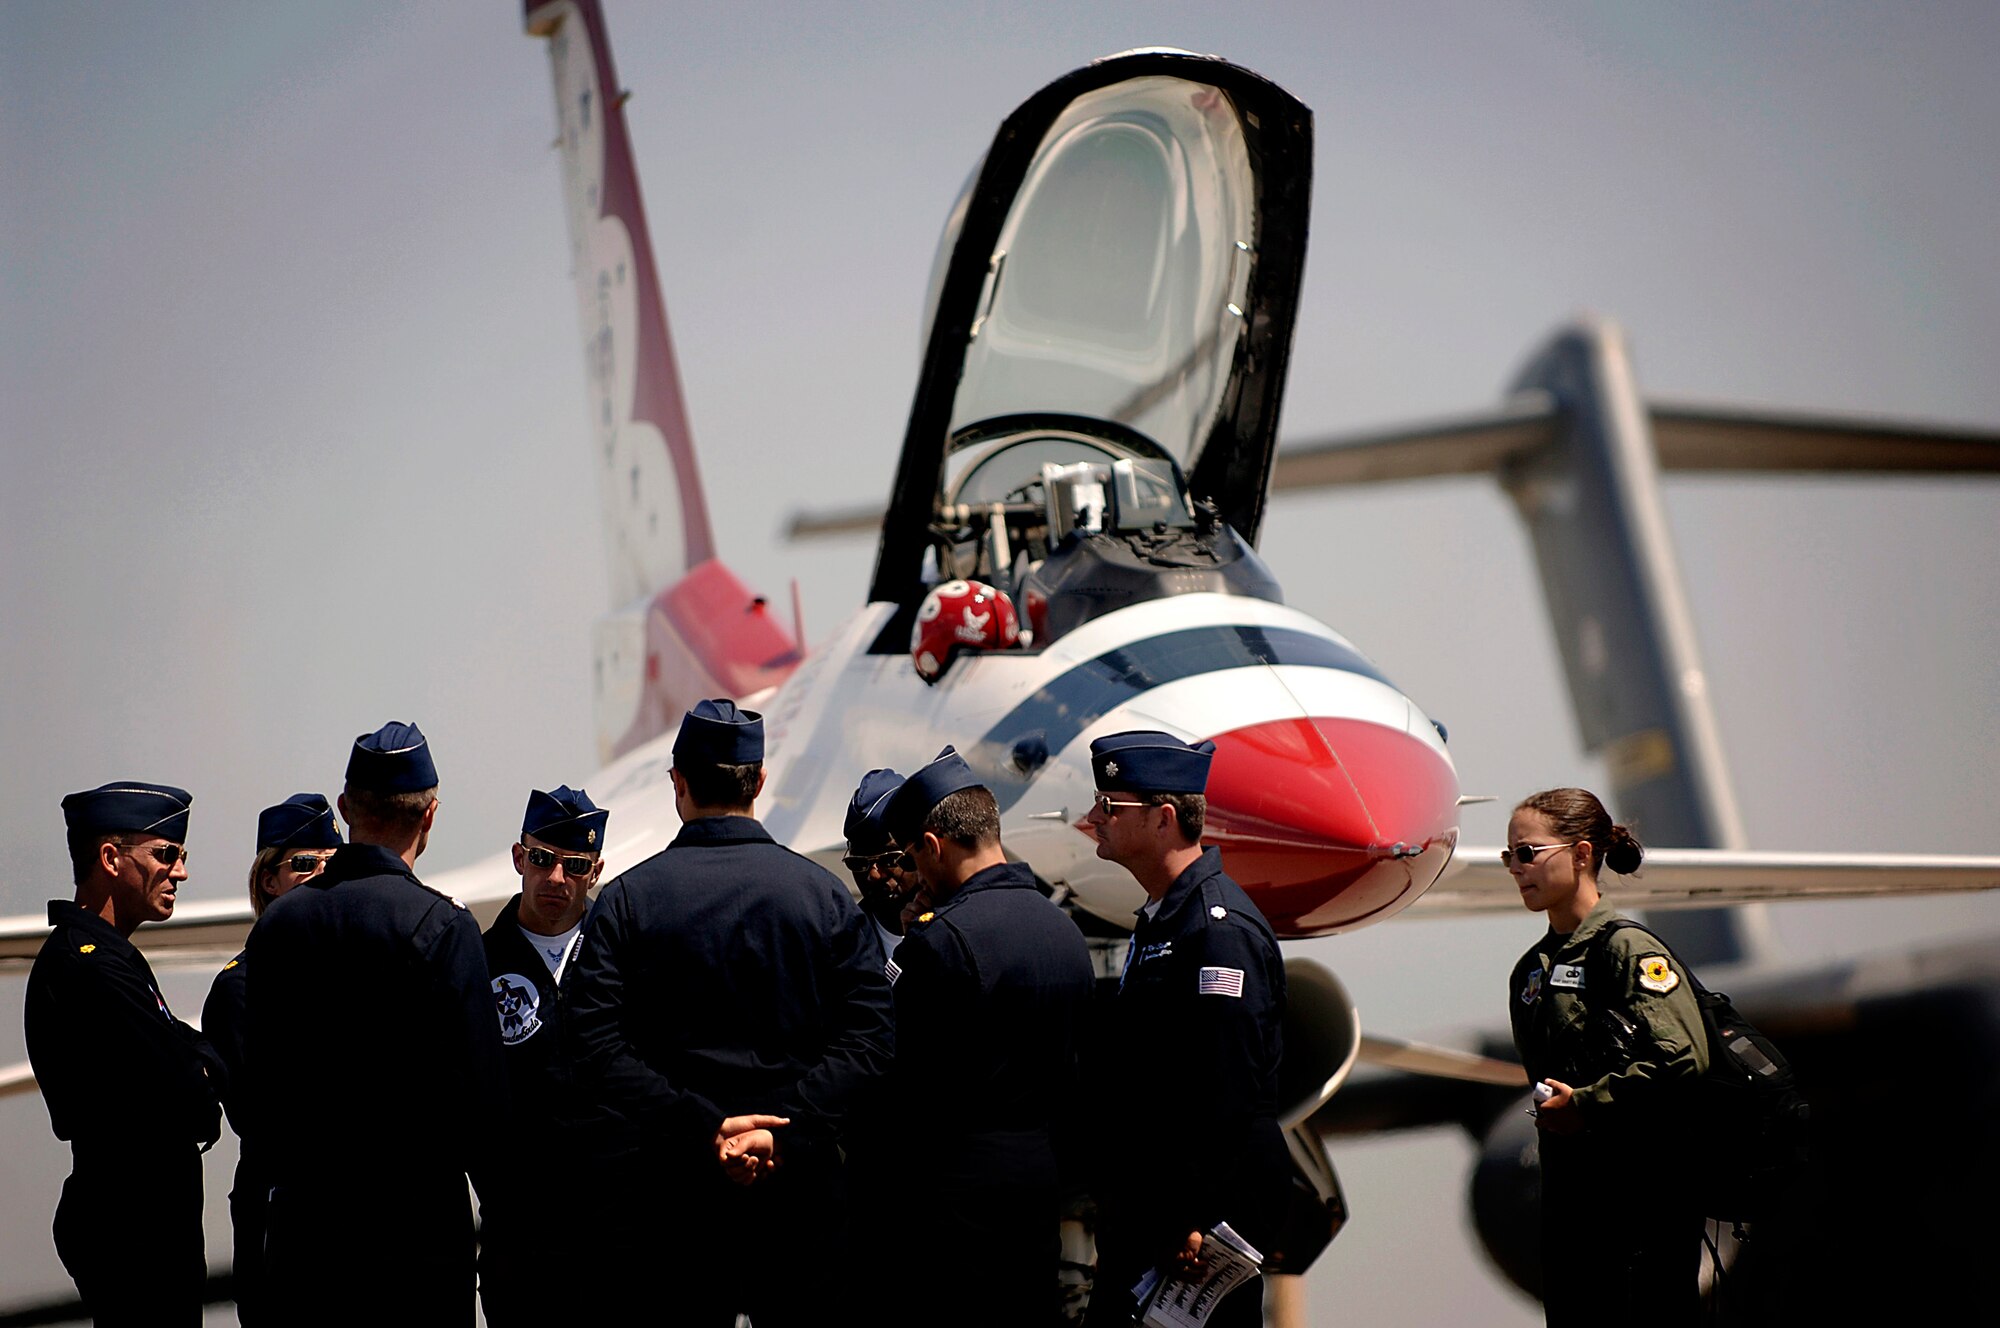 Lt. Col. Greg Thomas briefs the Thunderbird pilots after they arrive on the Charleston AFB flightline Monday. Colonel Thomas is the commander of the air demonstration team and flies the Thunderbirds number one jet and will be performing at the 2008 "Wings Over Charleston" Air Expo at Charleston AFB Saturday. (U.S. Air Force Photo/Senior Airman Nicholas Pilch)